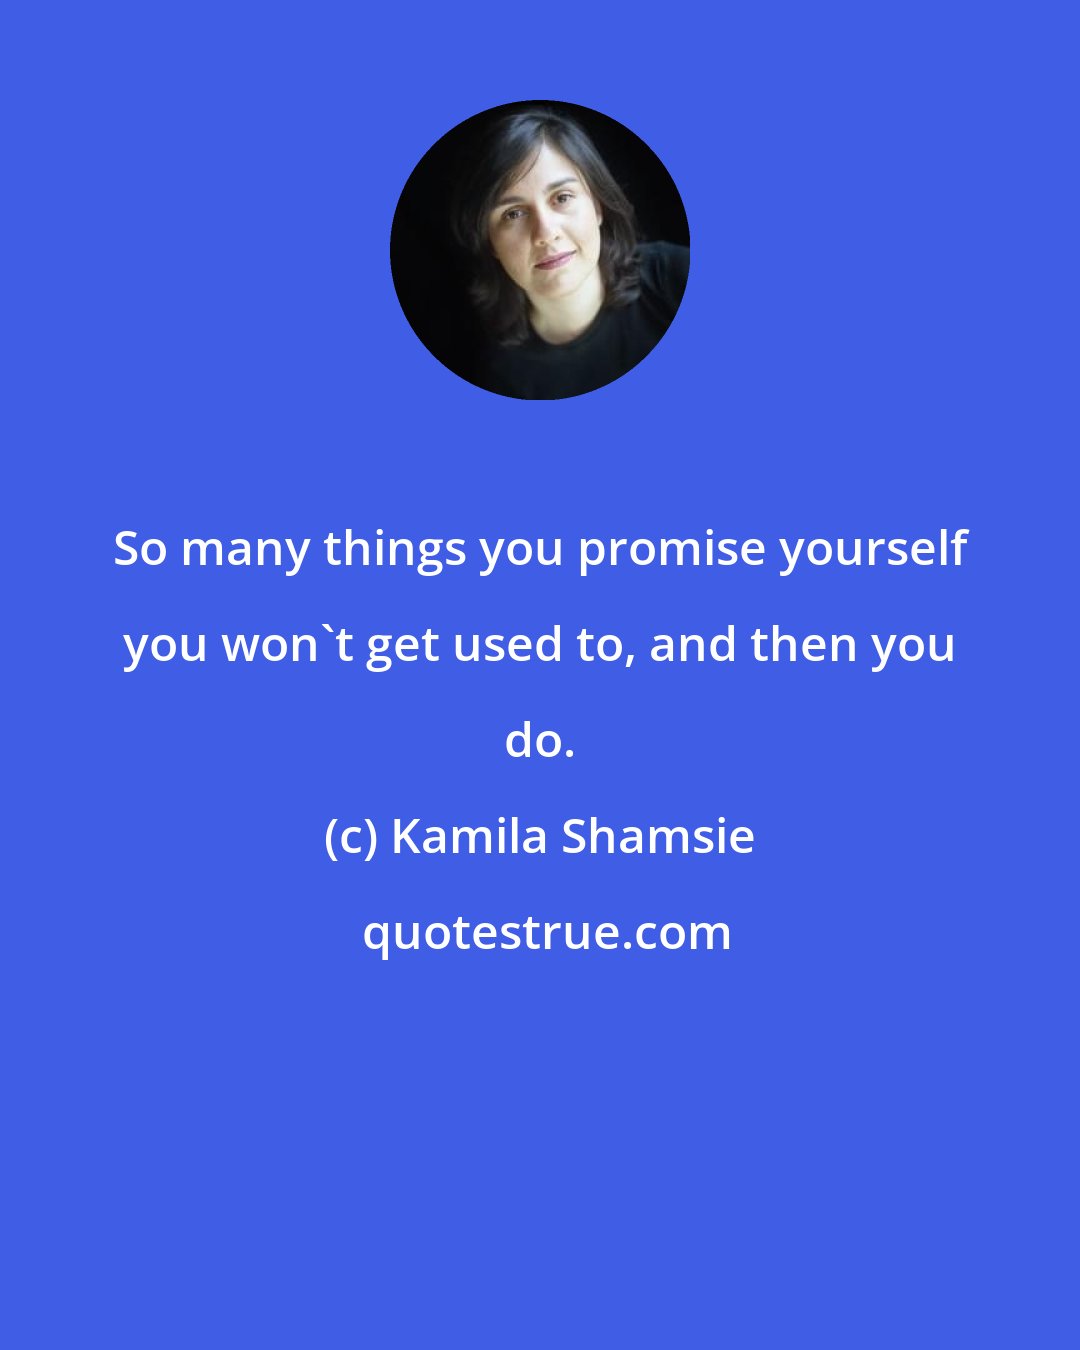 Kamila Shamsie: So many things you promise yourself you won't get used to, and then you do.